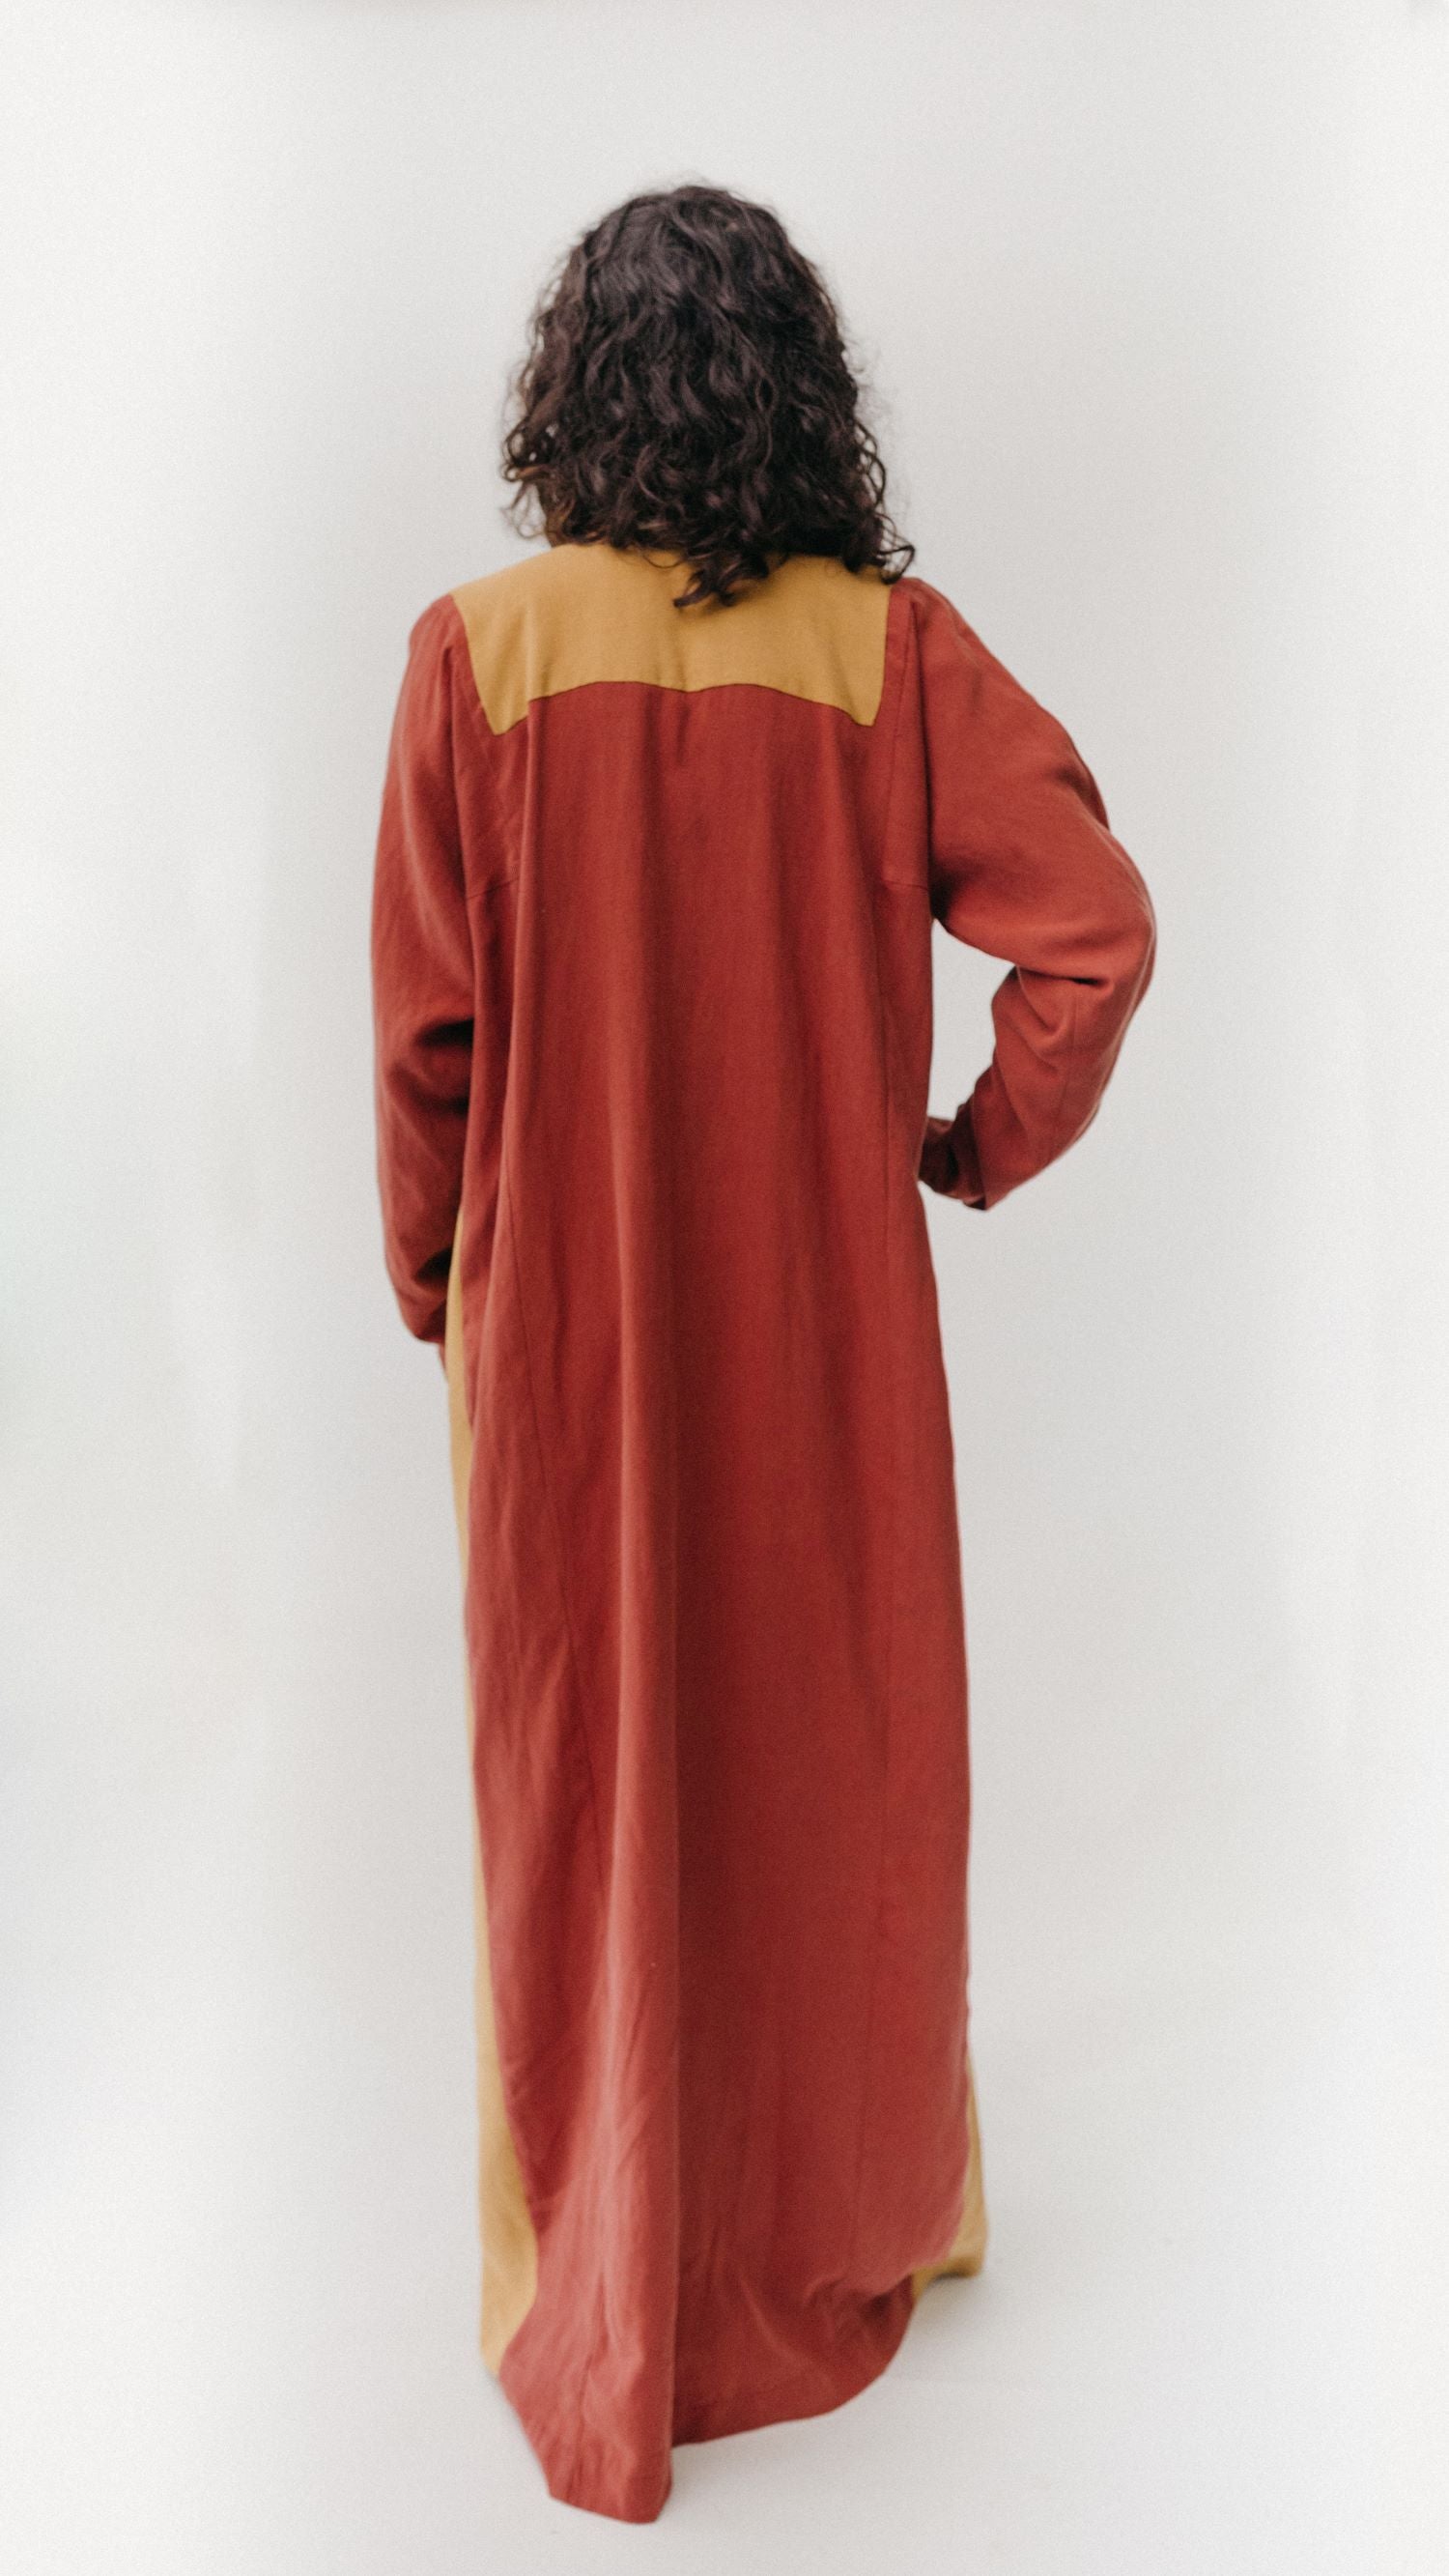 Back view of Gaza Dress that is red with mustard yellow top yoke.